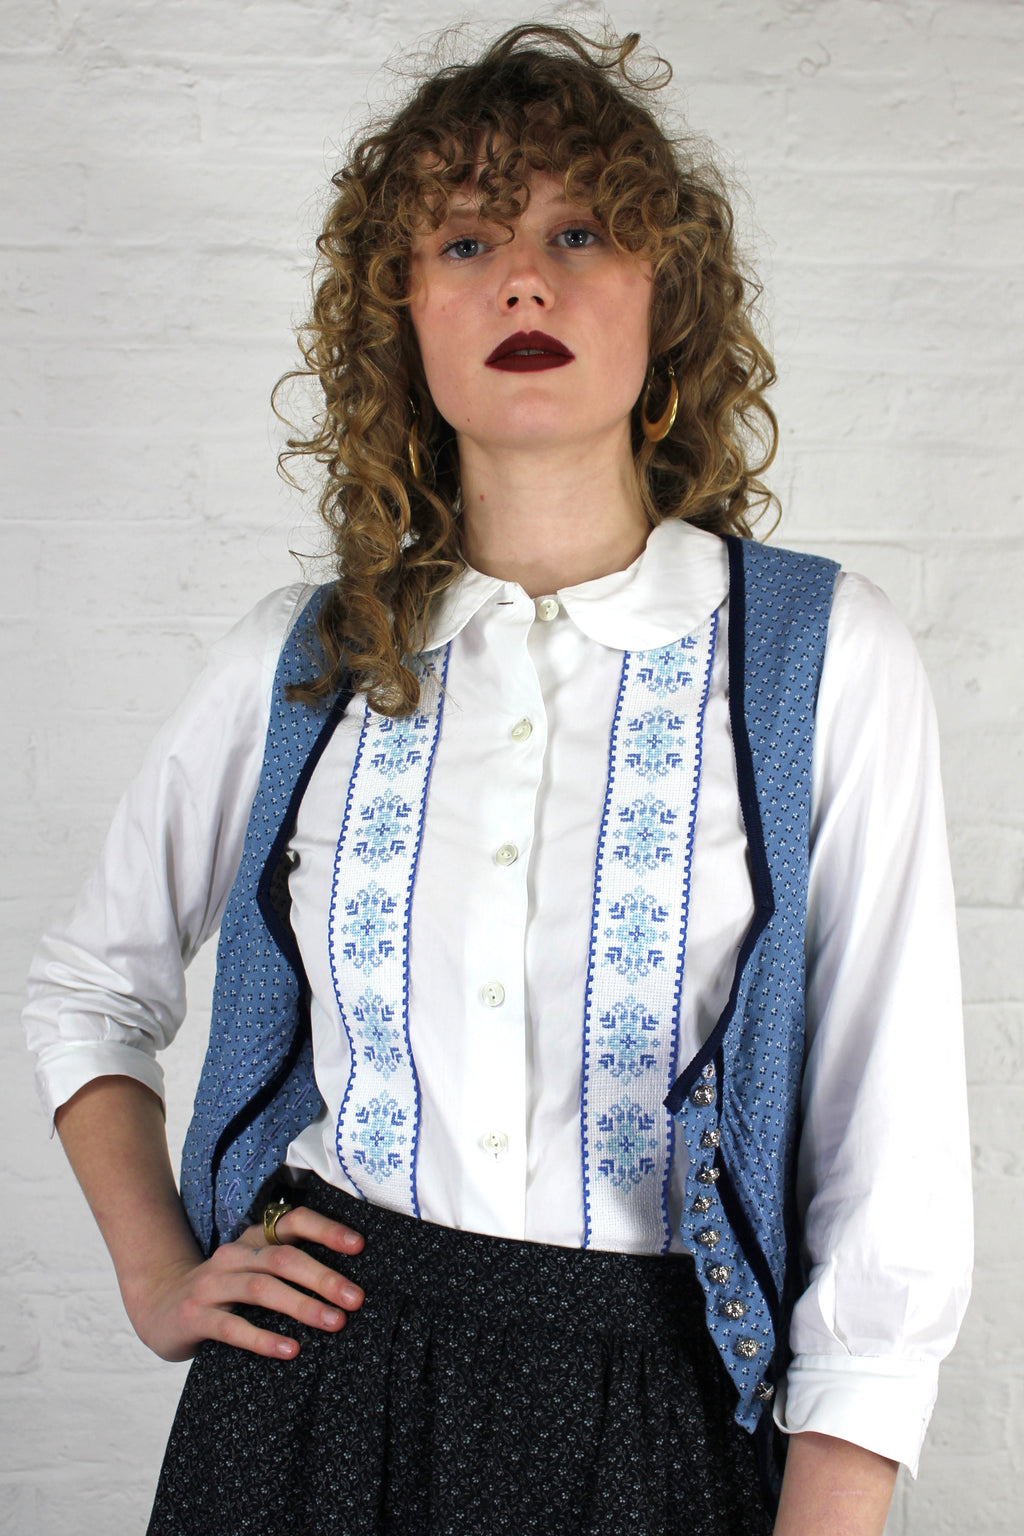 Vintage 70s White Shirt with Folk Style Embroidery | All About